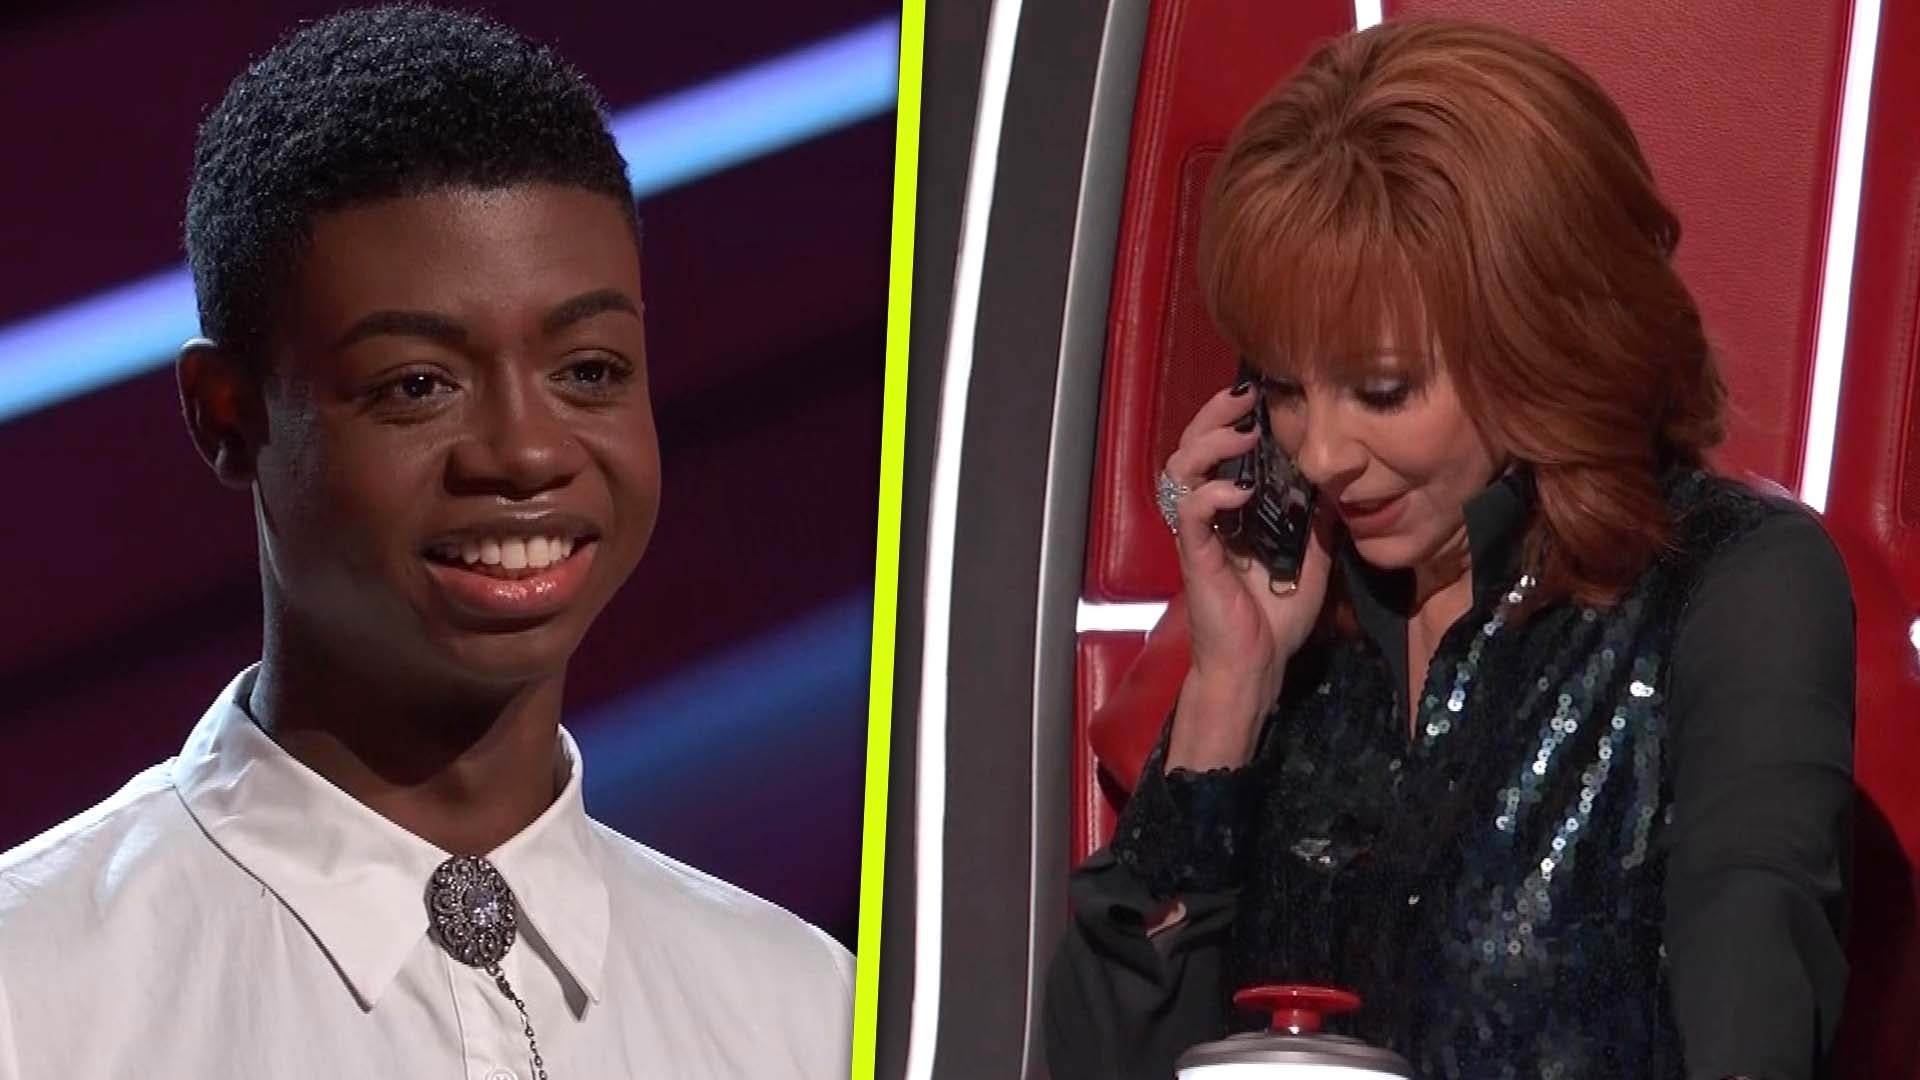 'The Voice': Reba McEntire Pretends to Call Keith Urban to Win Over a Singer